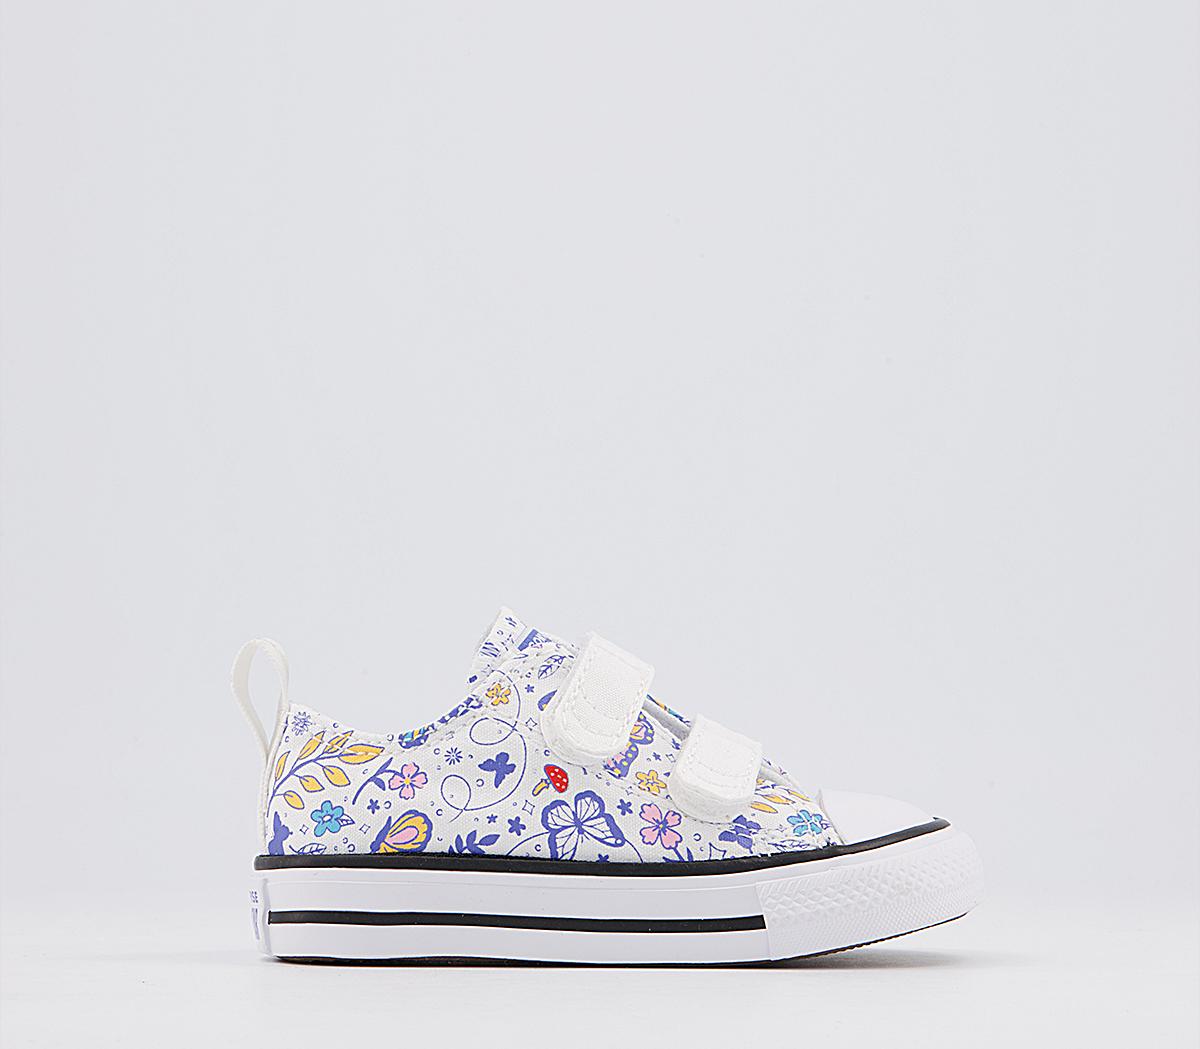 ConverseAll Star 2vlace TrainersWhite Black White Butterfly